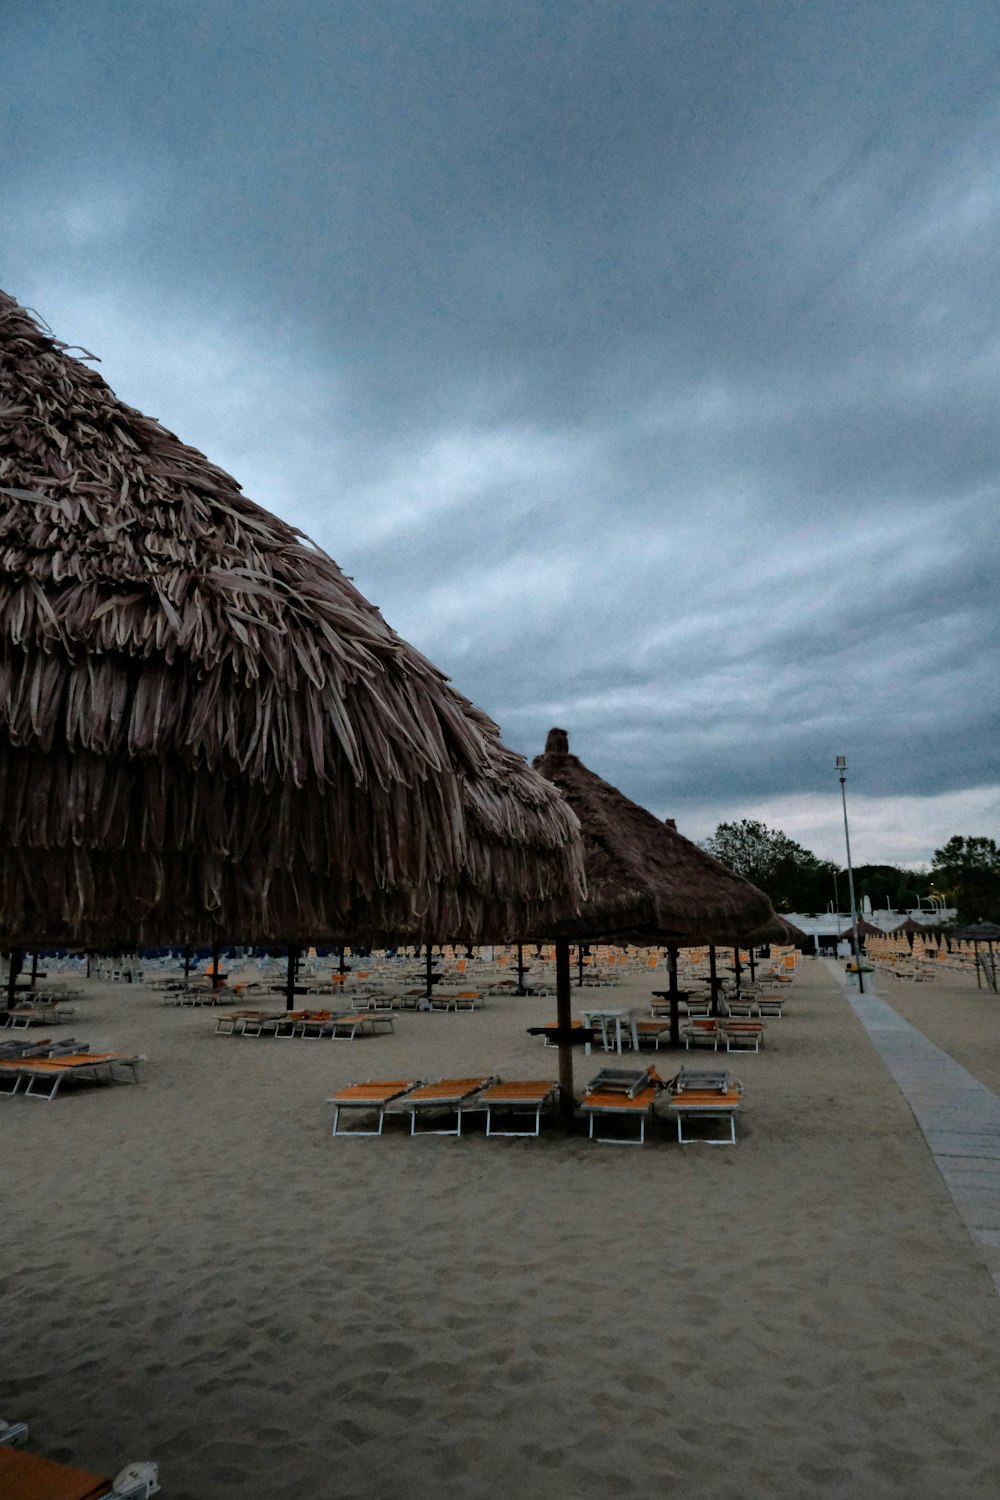 a row of beach chairs sitting under a thatched umbrella